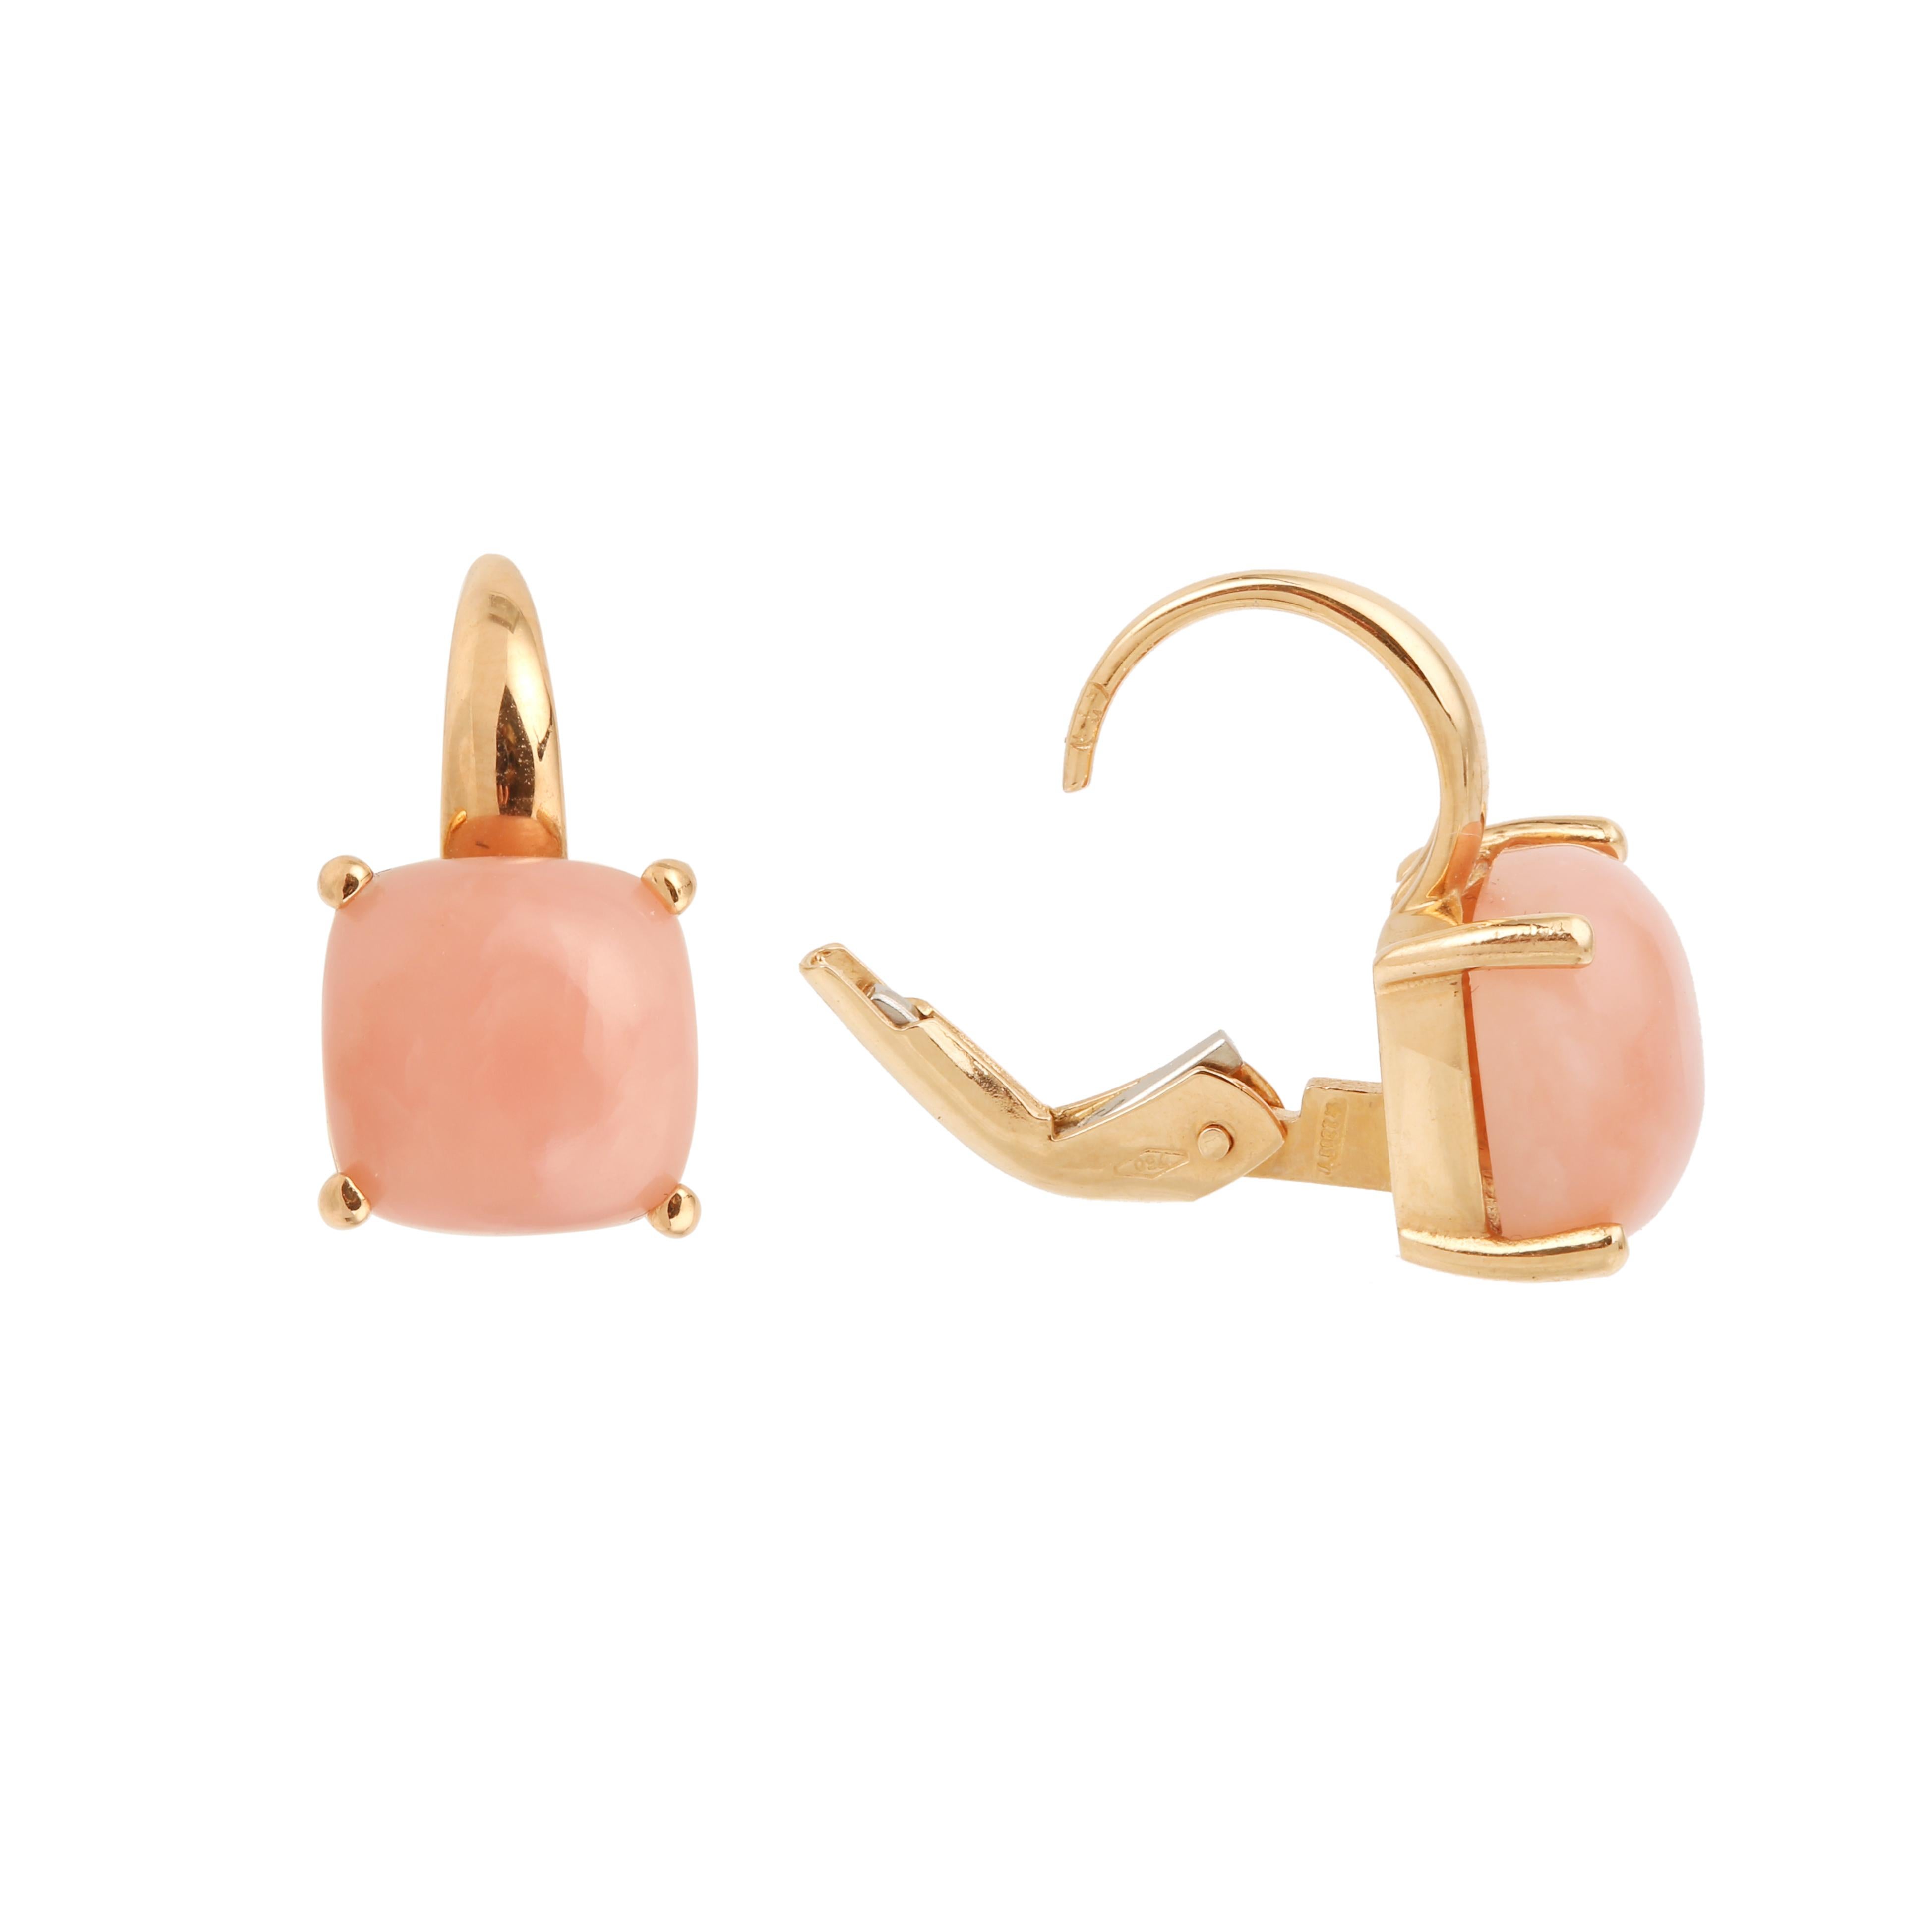 Pair of rose gold earrings set with pink opal cabochons.

Total estimated opal weight: 3 carats

Dimensions: 14.80 x 8.22 x 6.75 mm (0.582 x 0.323 x 0.265 inch)

French work circa 2000

Weight of earrings: 3.3 g

18-carat rose gold,